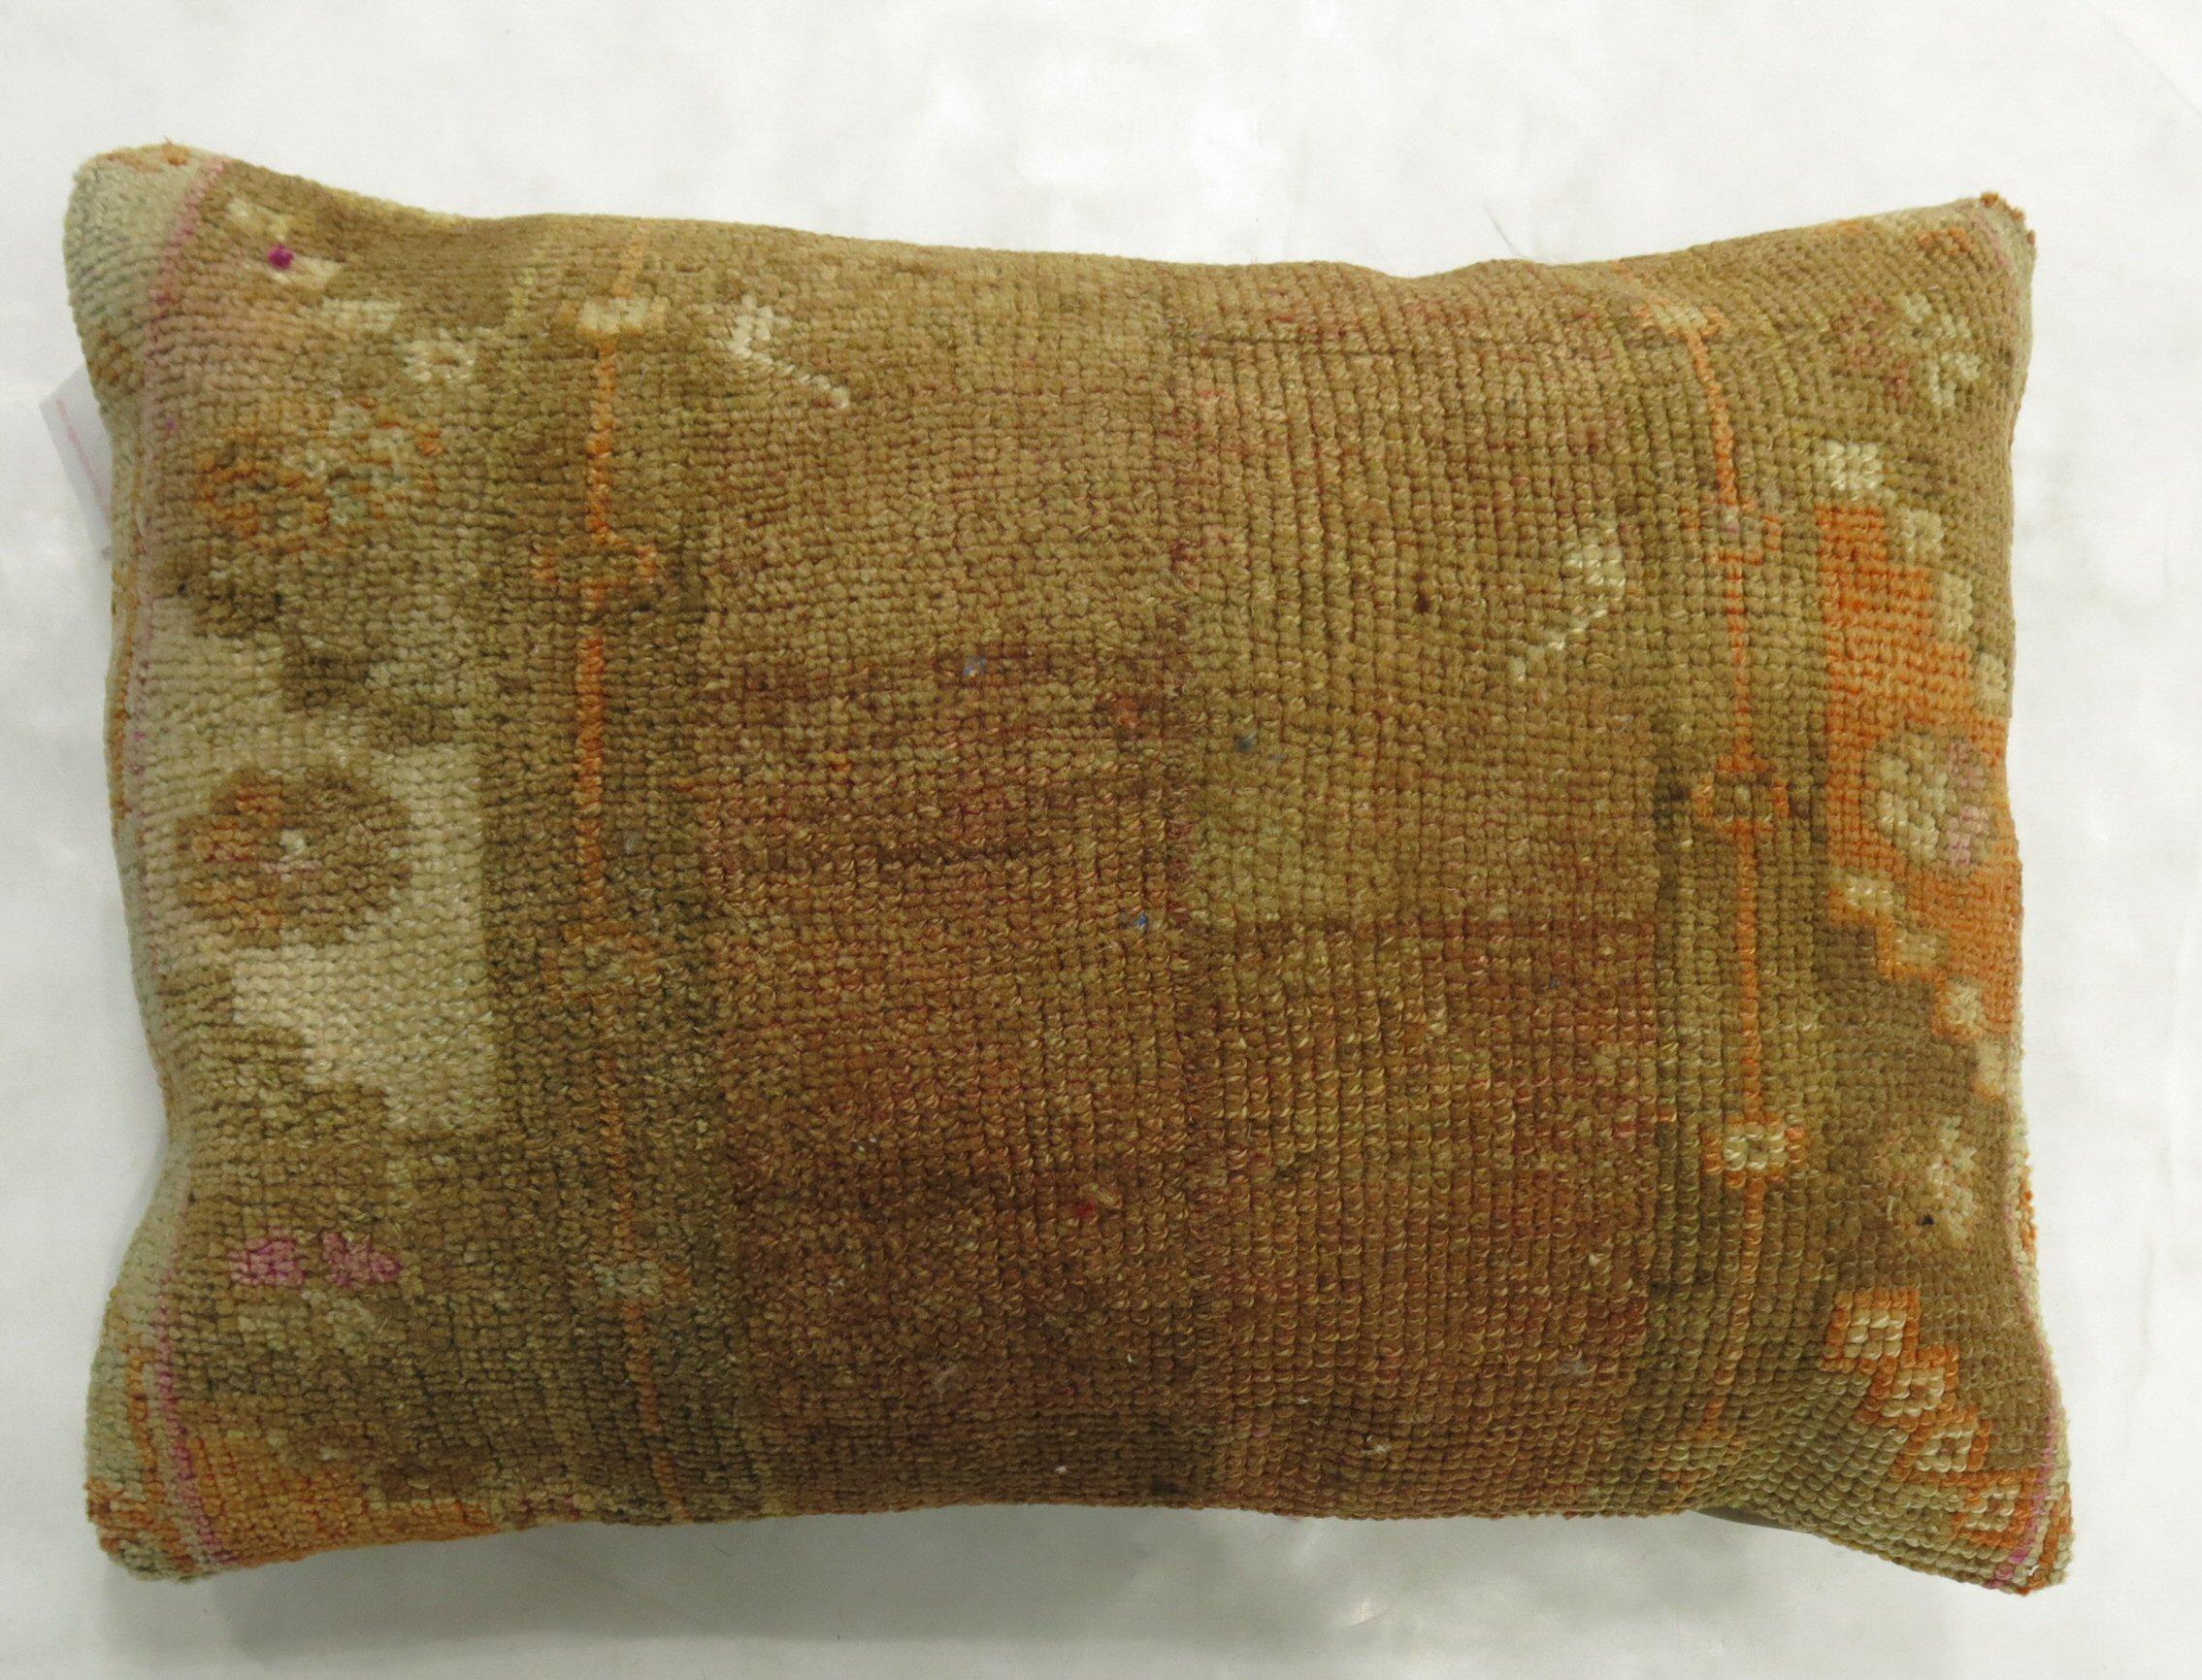 Lumbar size pillow made from a vintage Turkish Anatolian rug. 

Measures: 16'' x 24''.